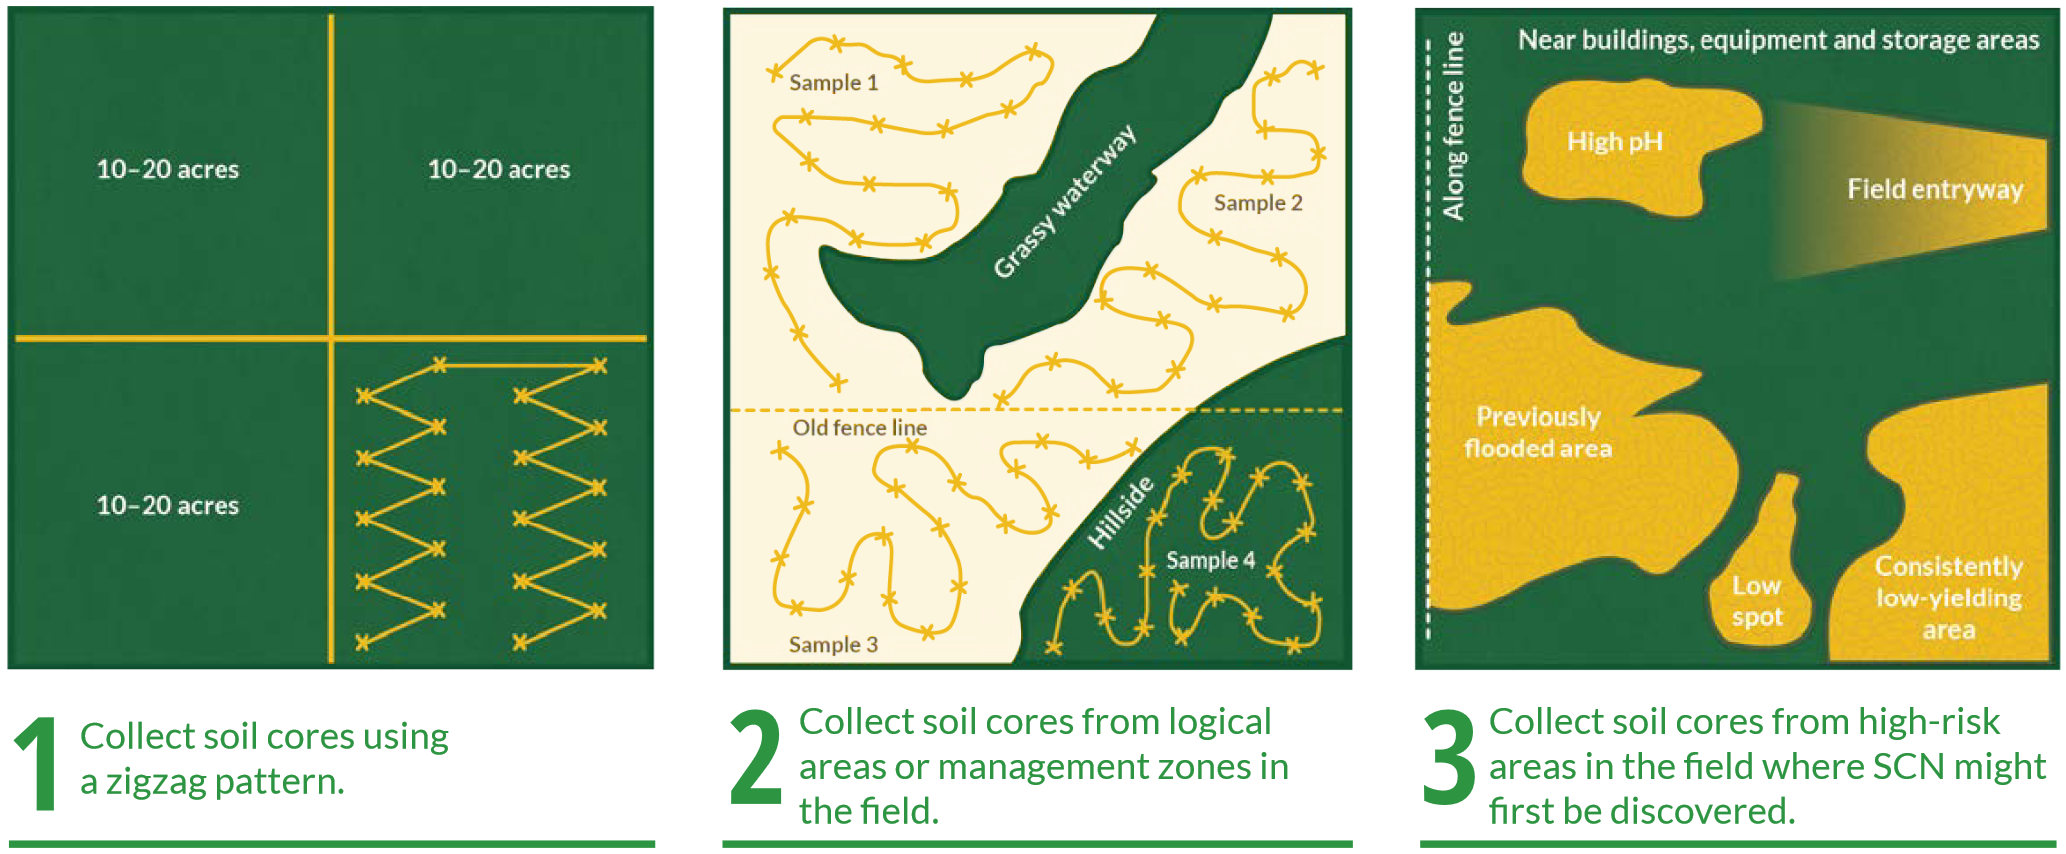 Three strategies for sampling for Soybean Cyst Nematode (SCN): 1. Collect soil cores using a zigzag pattern. 2. Collect soil cores from logical areas or management zones. 3. Collect soil cores from high-risk areas in the field where SCN might be first discovered.